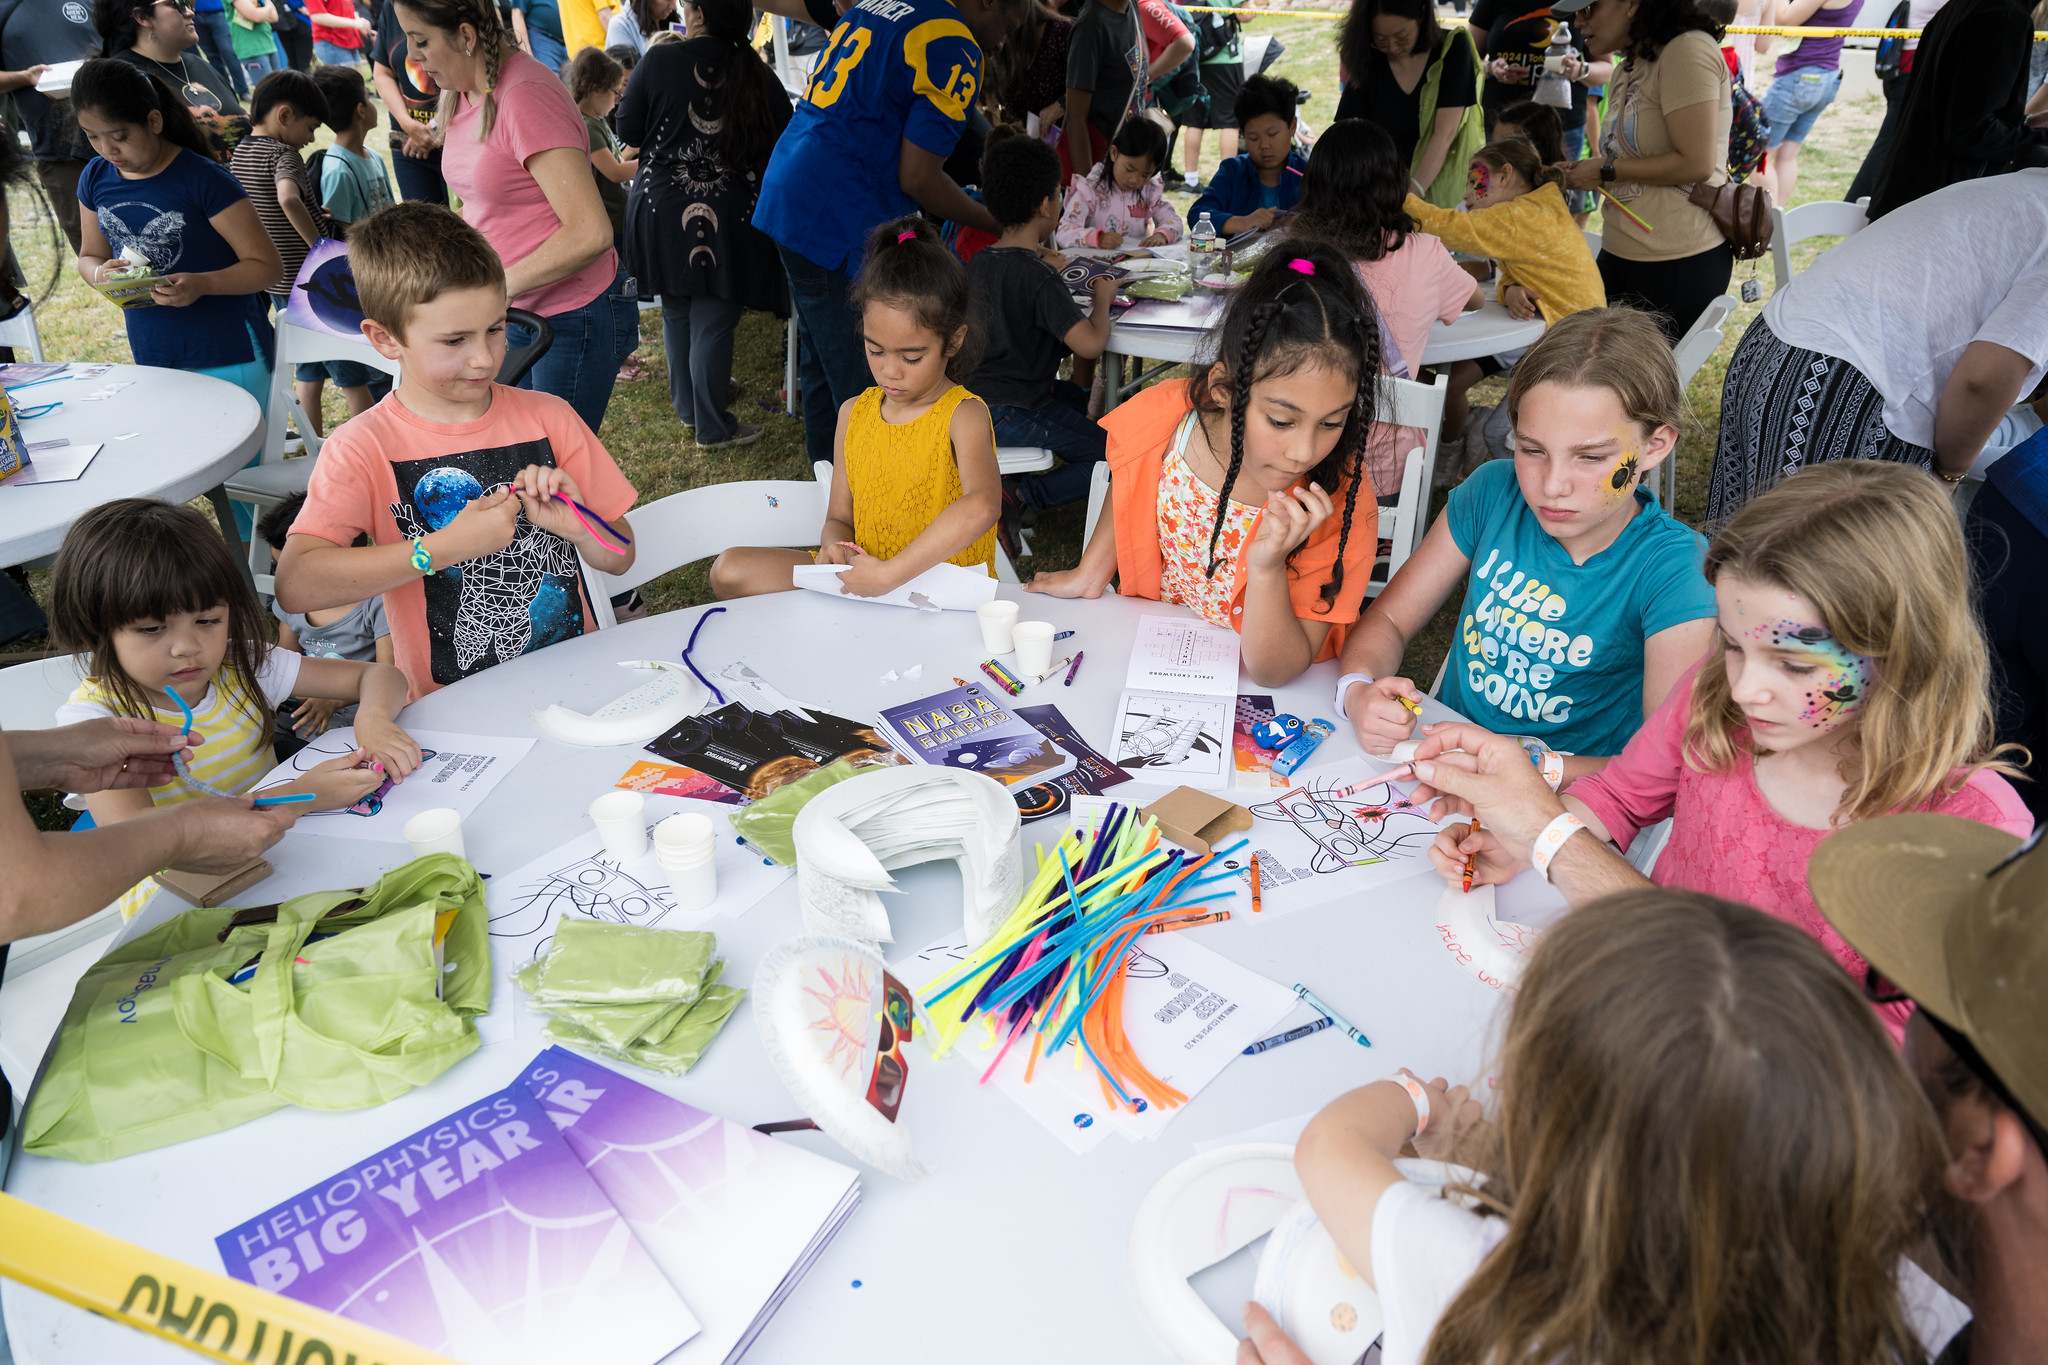 Several children stand around a large white circular table. Art supplies are scattered across the table, including pipe cleaners, paper plates, coloring sheets, posters, and crayons.